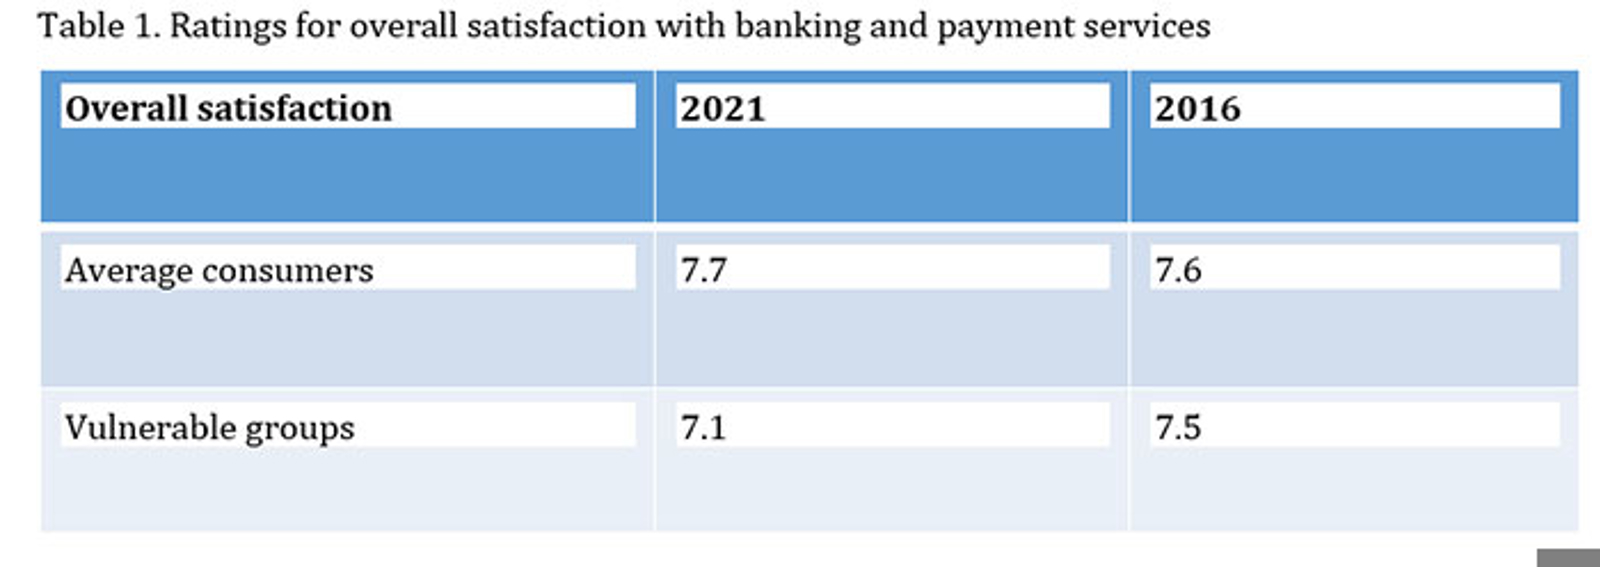 Ratings for overall satisfaction with banking and payment services